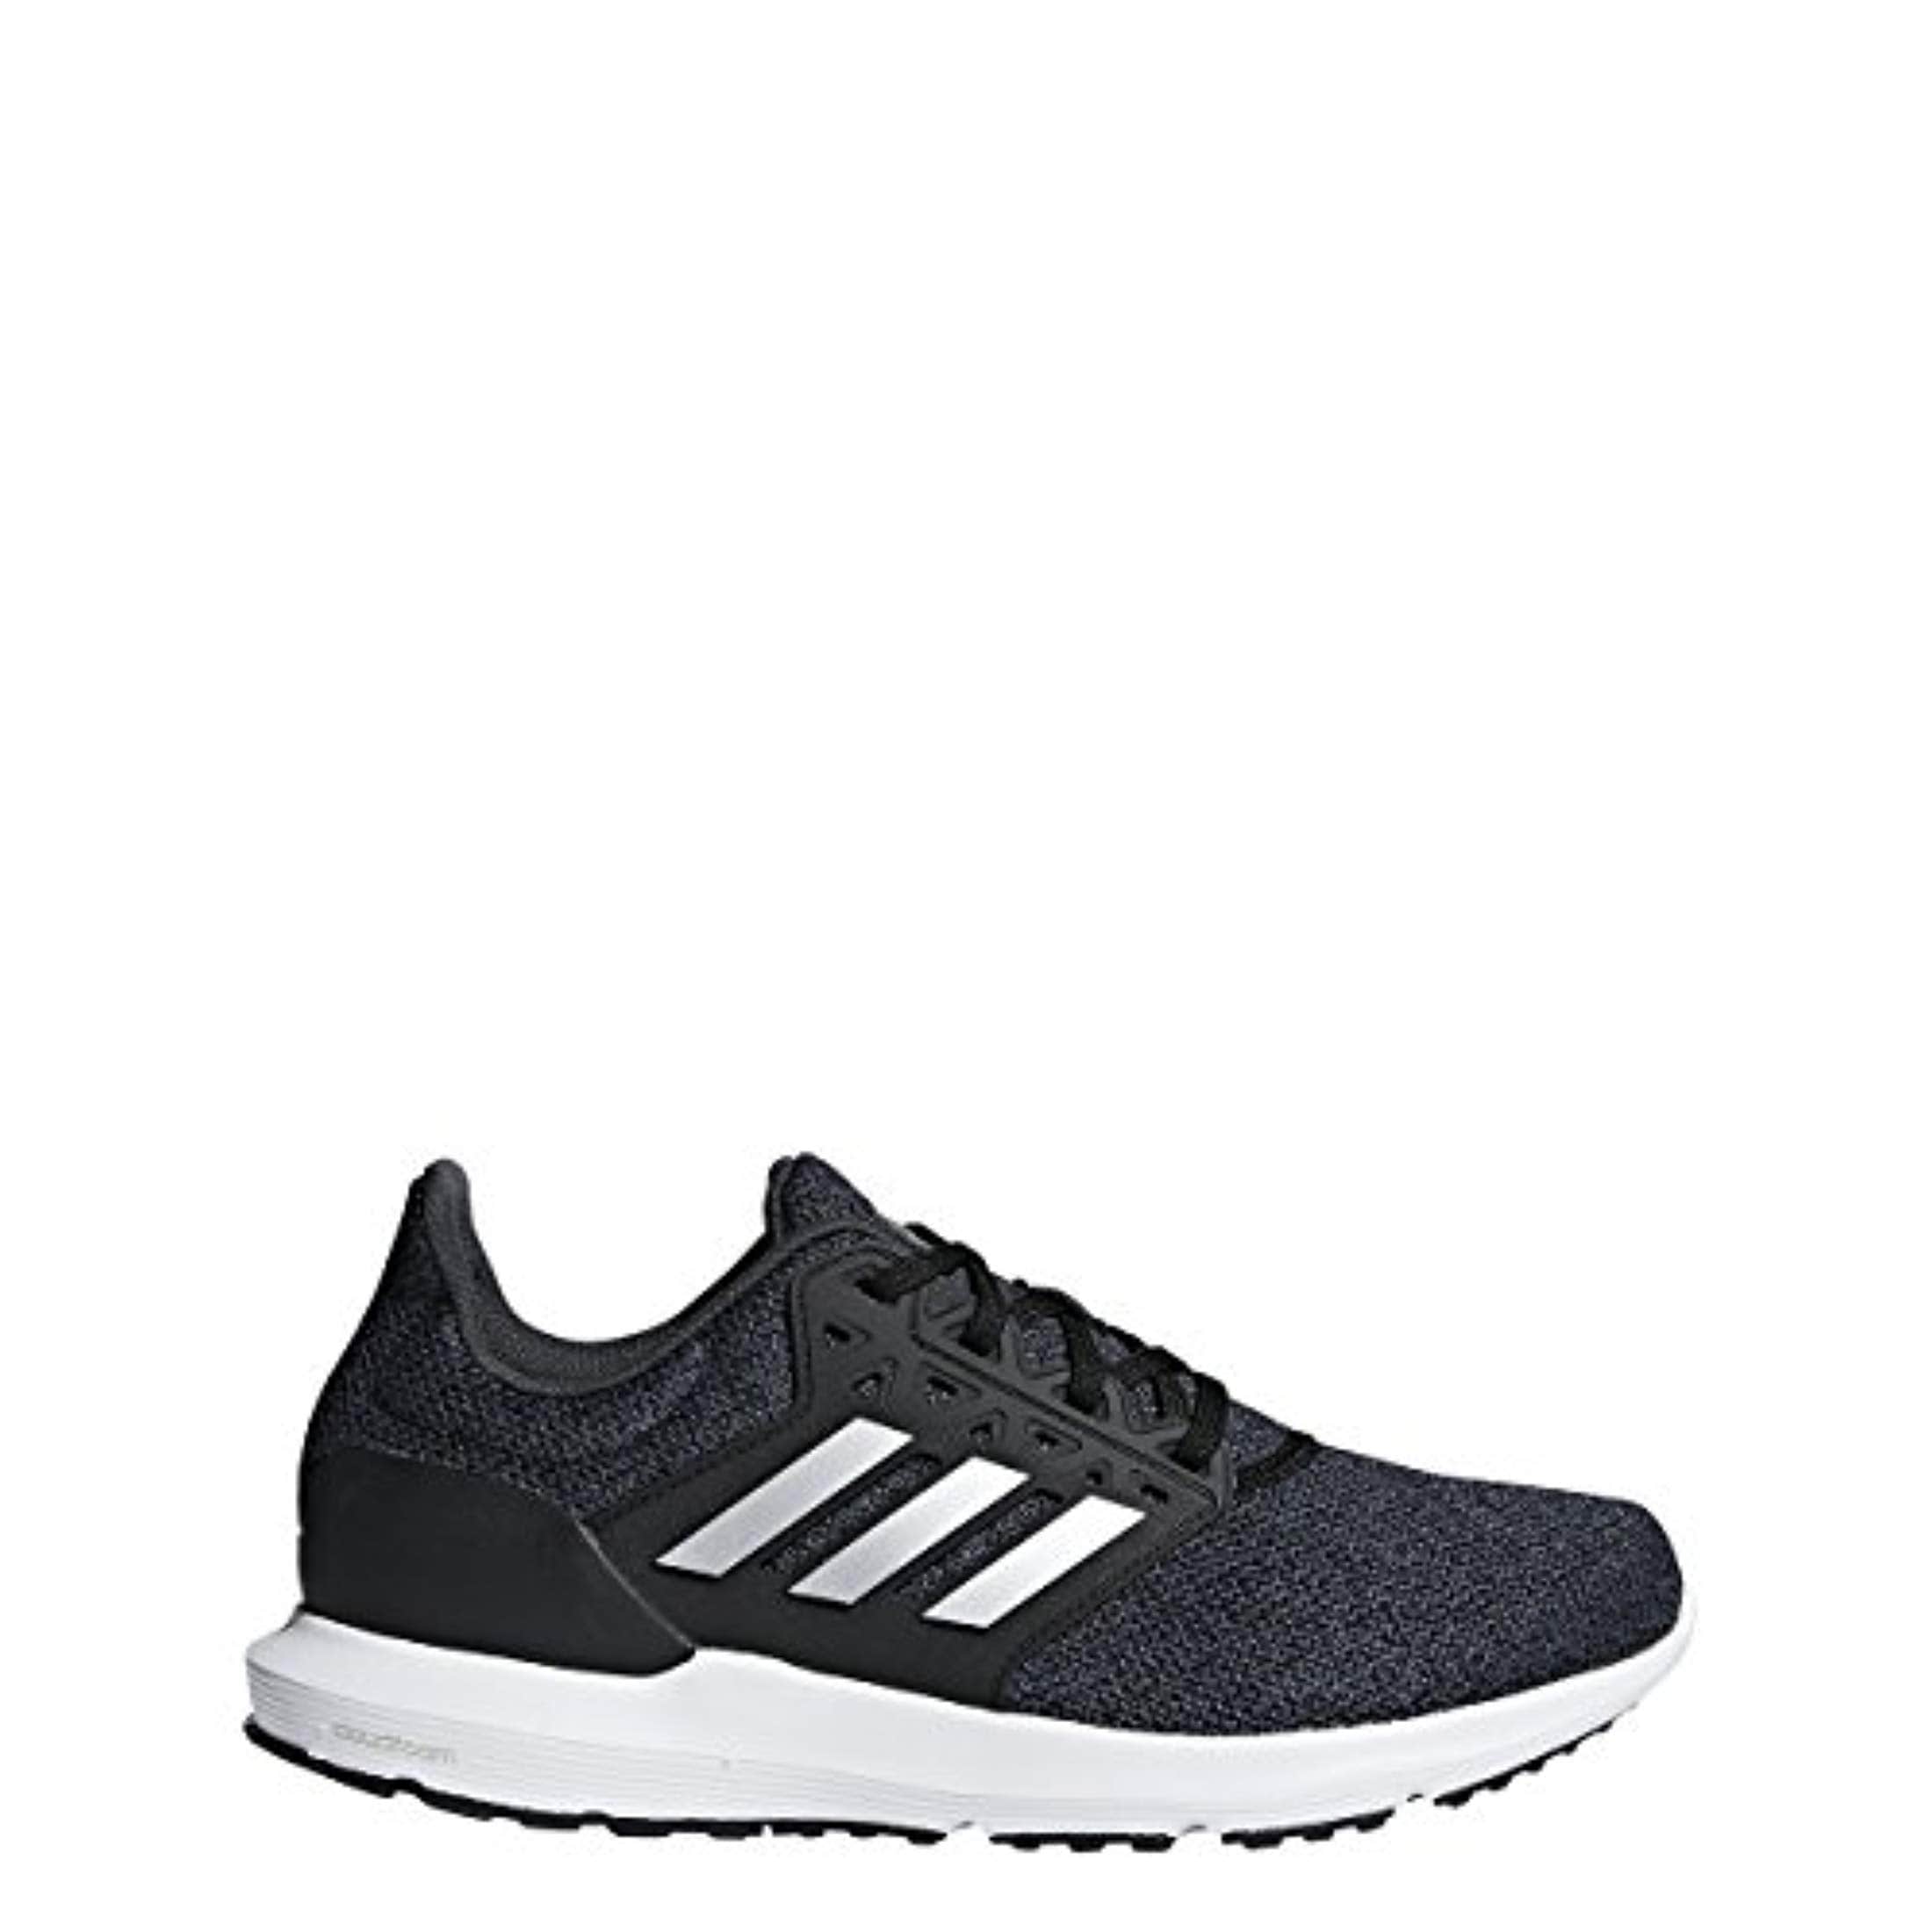 adidas men's solyx training shoes